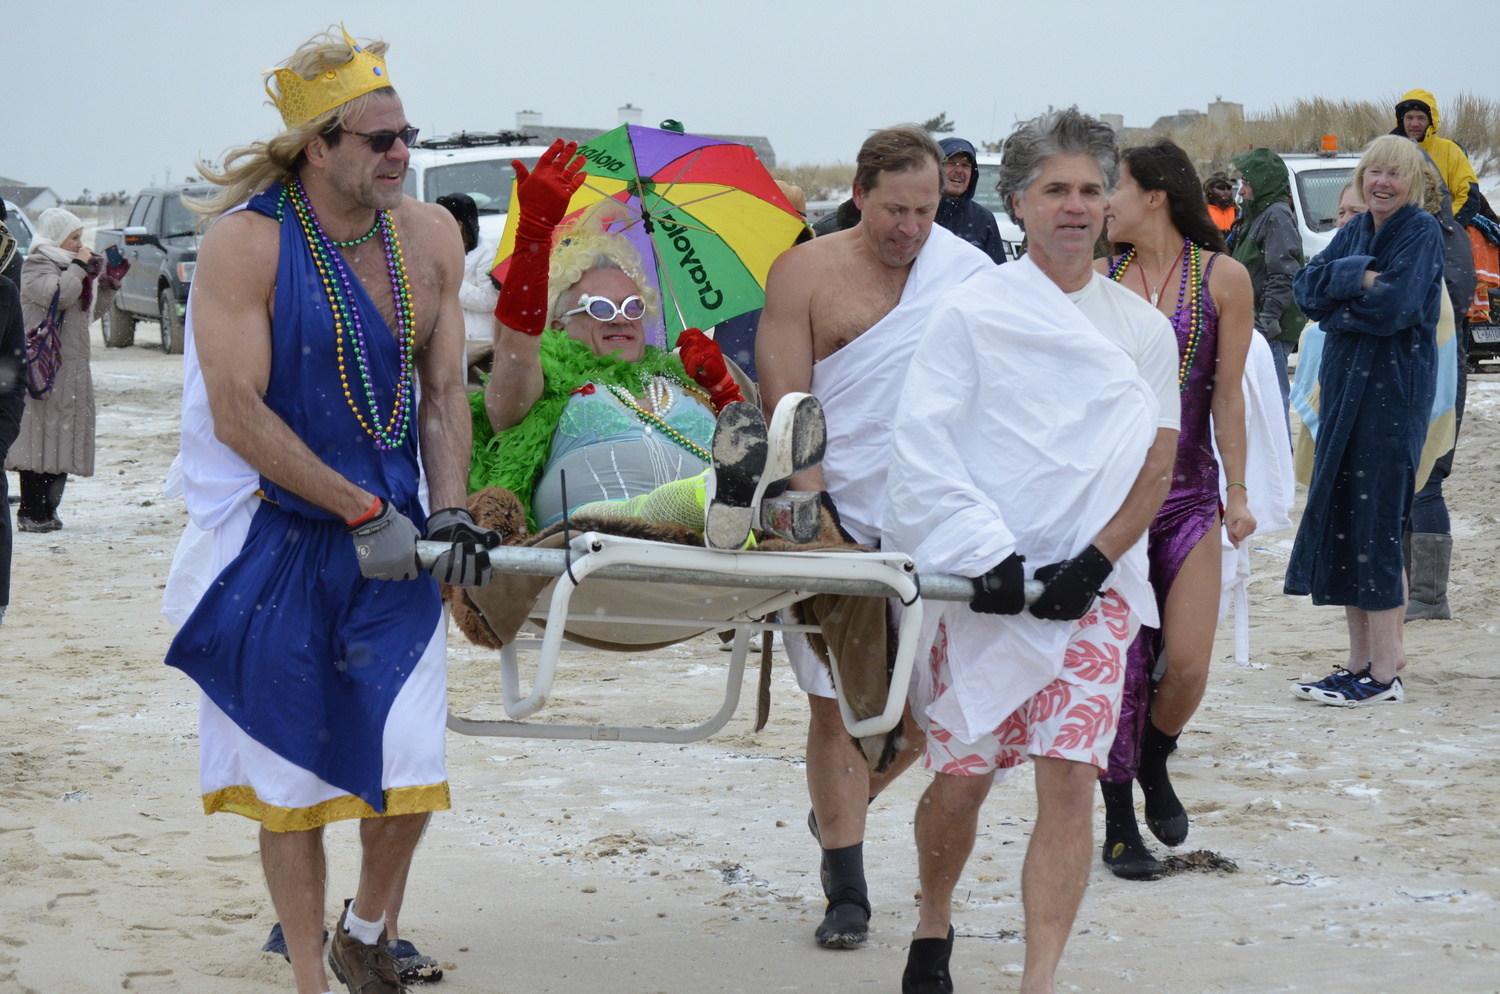 Jimmy Mack with his retinue at the 2014 Plunge.